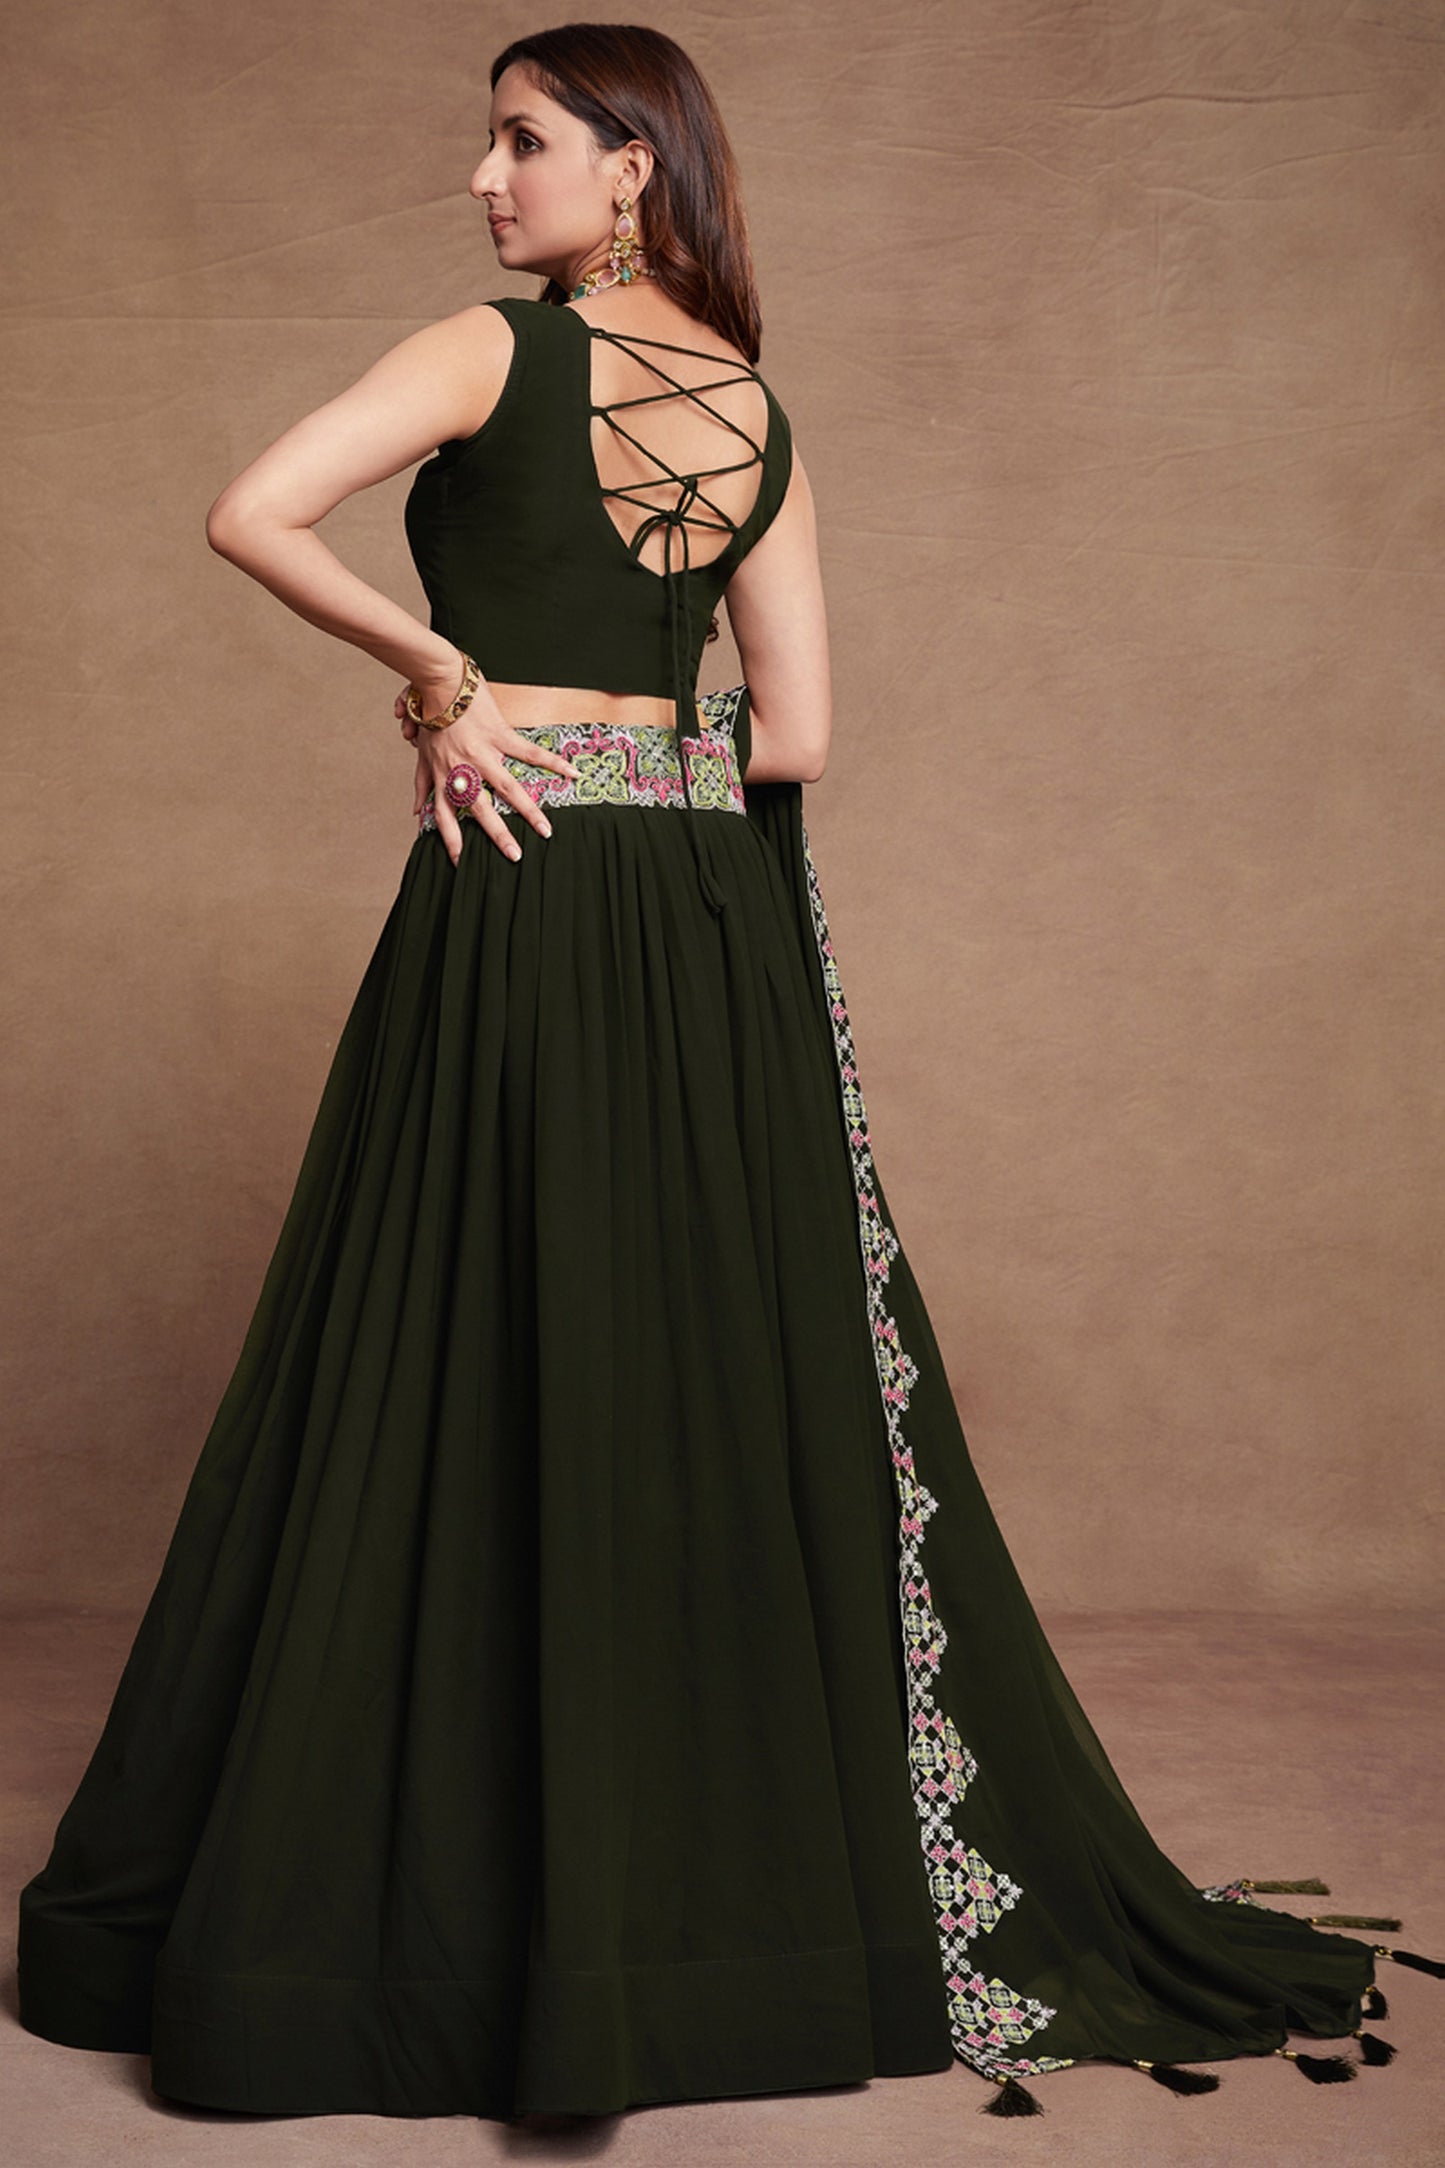 Dark Green Georgette Lehenga Choli 6 Meter Flair For Indian Festivals & Weddings - Sequence Embroidery Work, Thread Embroidery Work